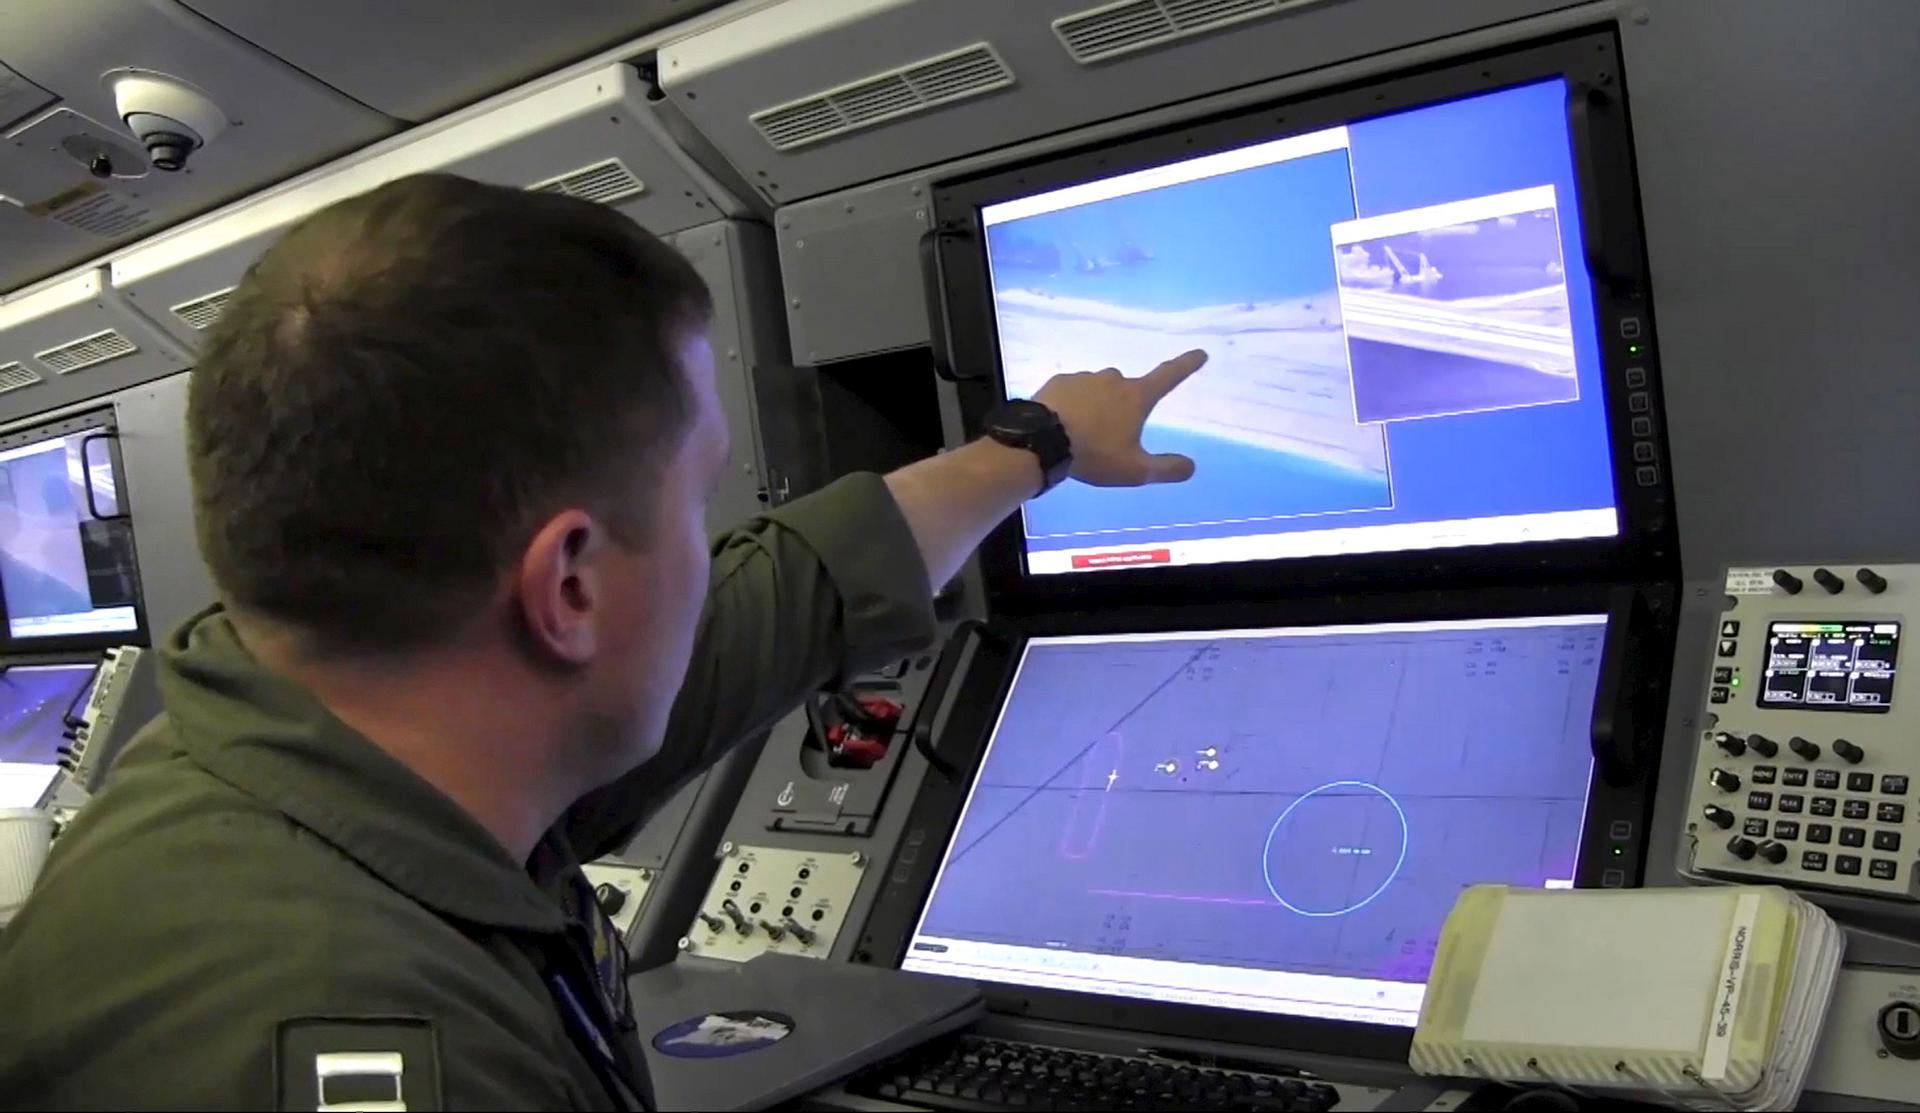 A U.S. Navy crewman aboard a P-8A Poseidon surveillance aircraft views a computer screen purportedly showing Chinese construction on the reclaimed land of Fiery Cross Reef in the disputed Spratly Islands in the South China Sea in this still image from vid